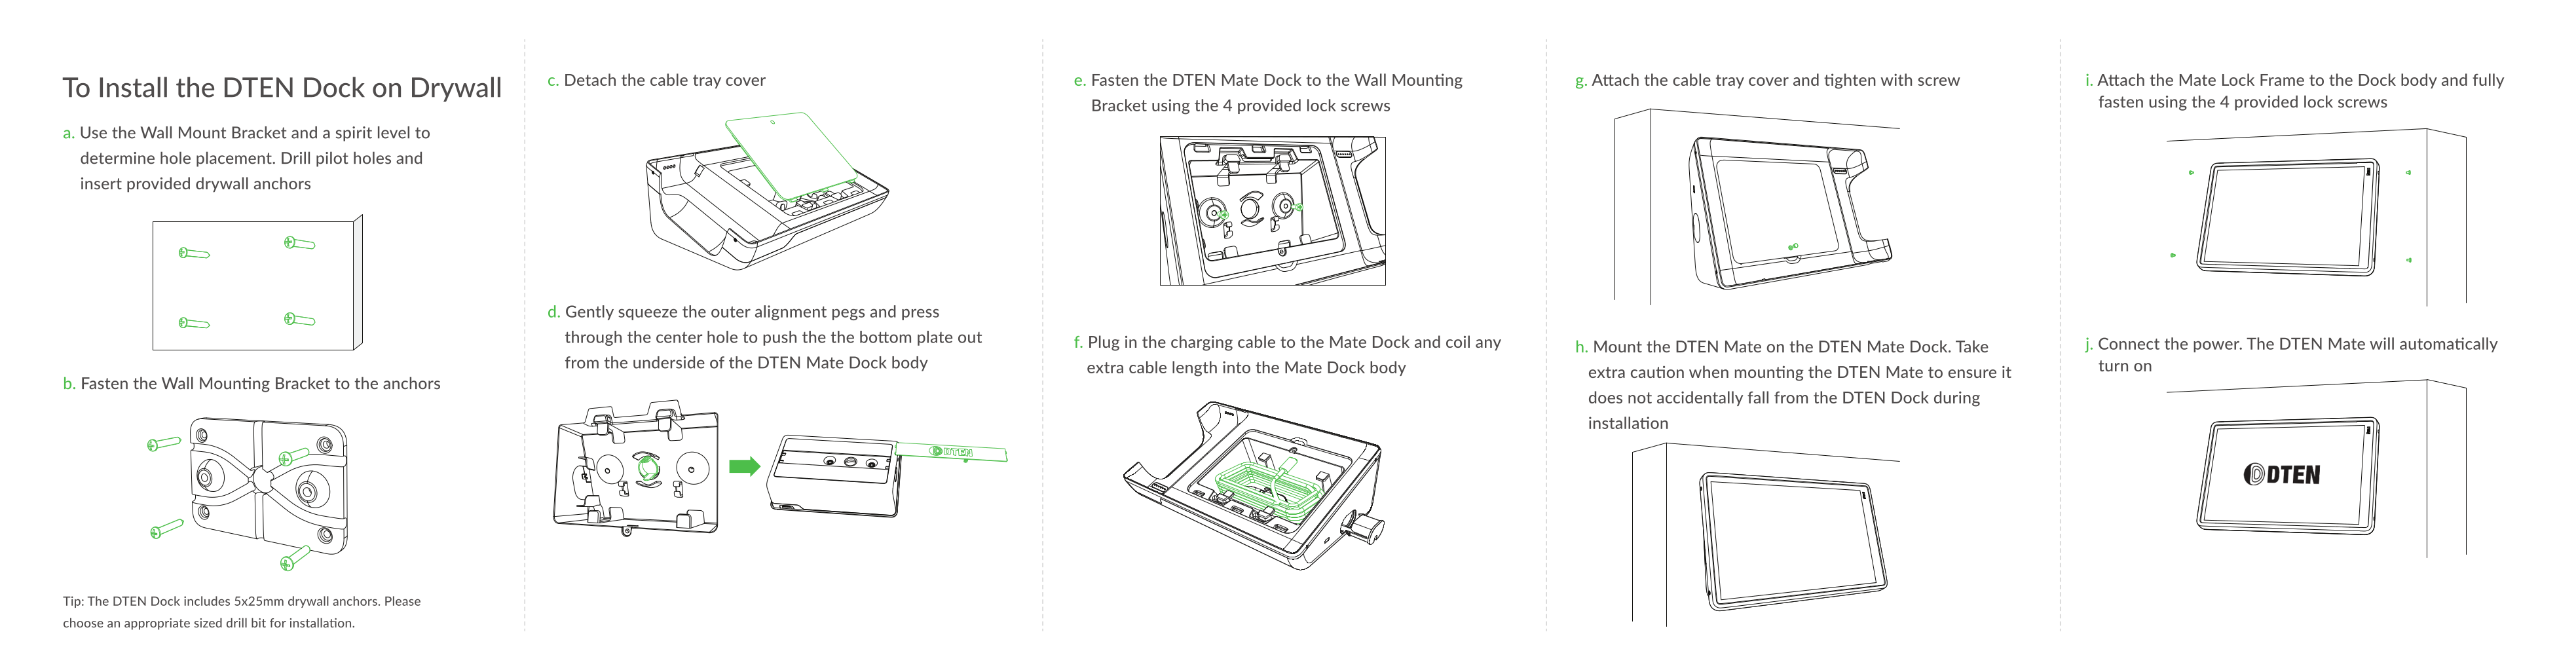 DTEN_Dock_Product_Guide_0083112.png